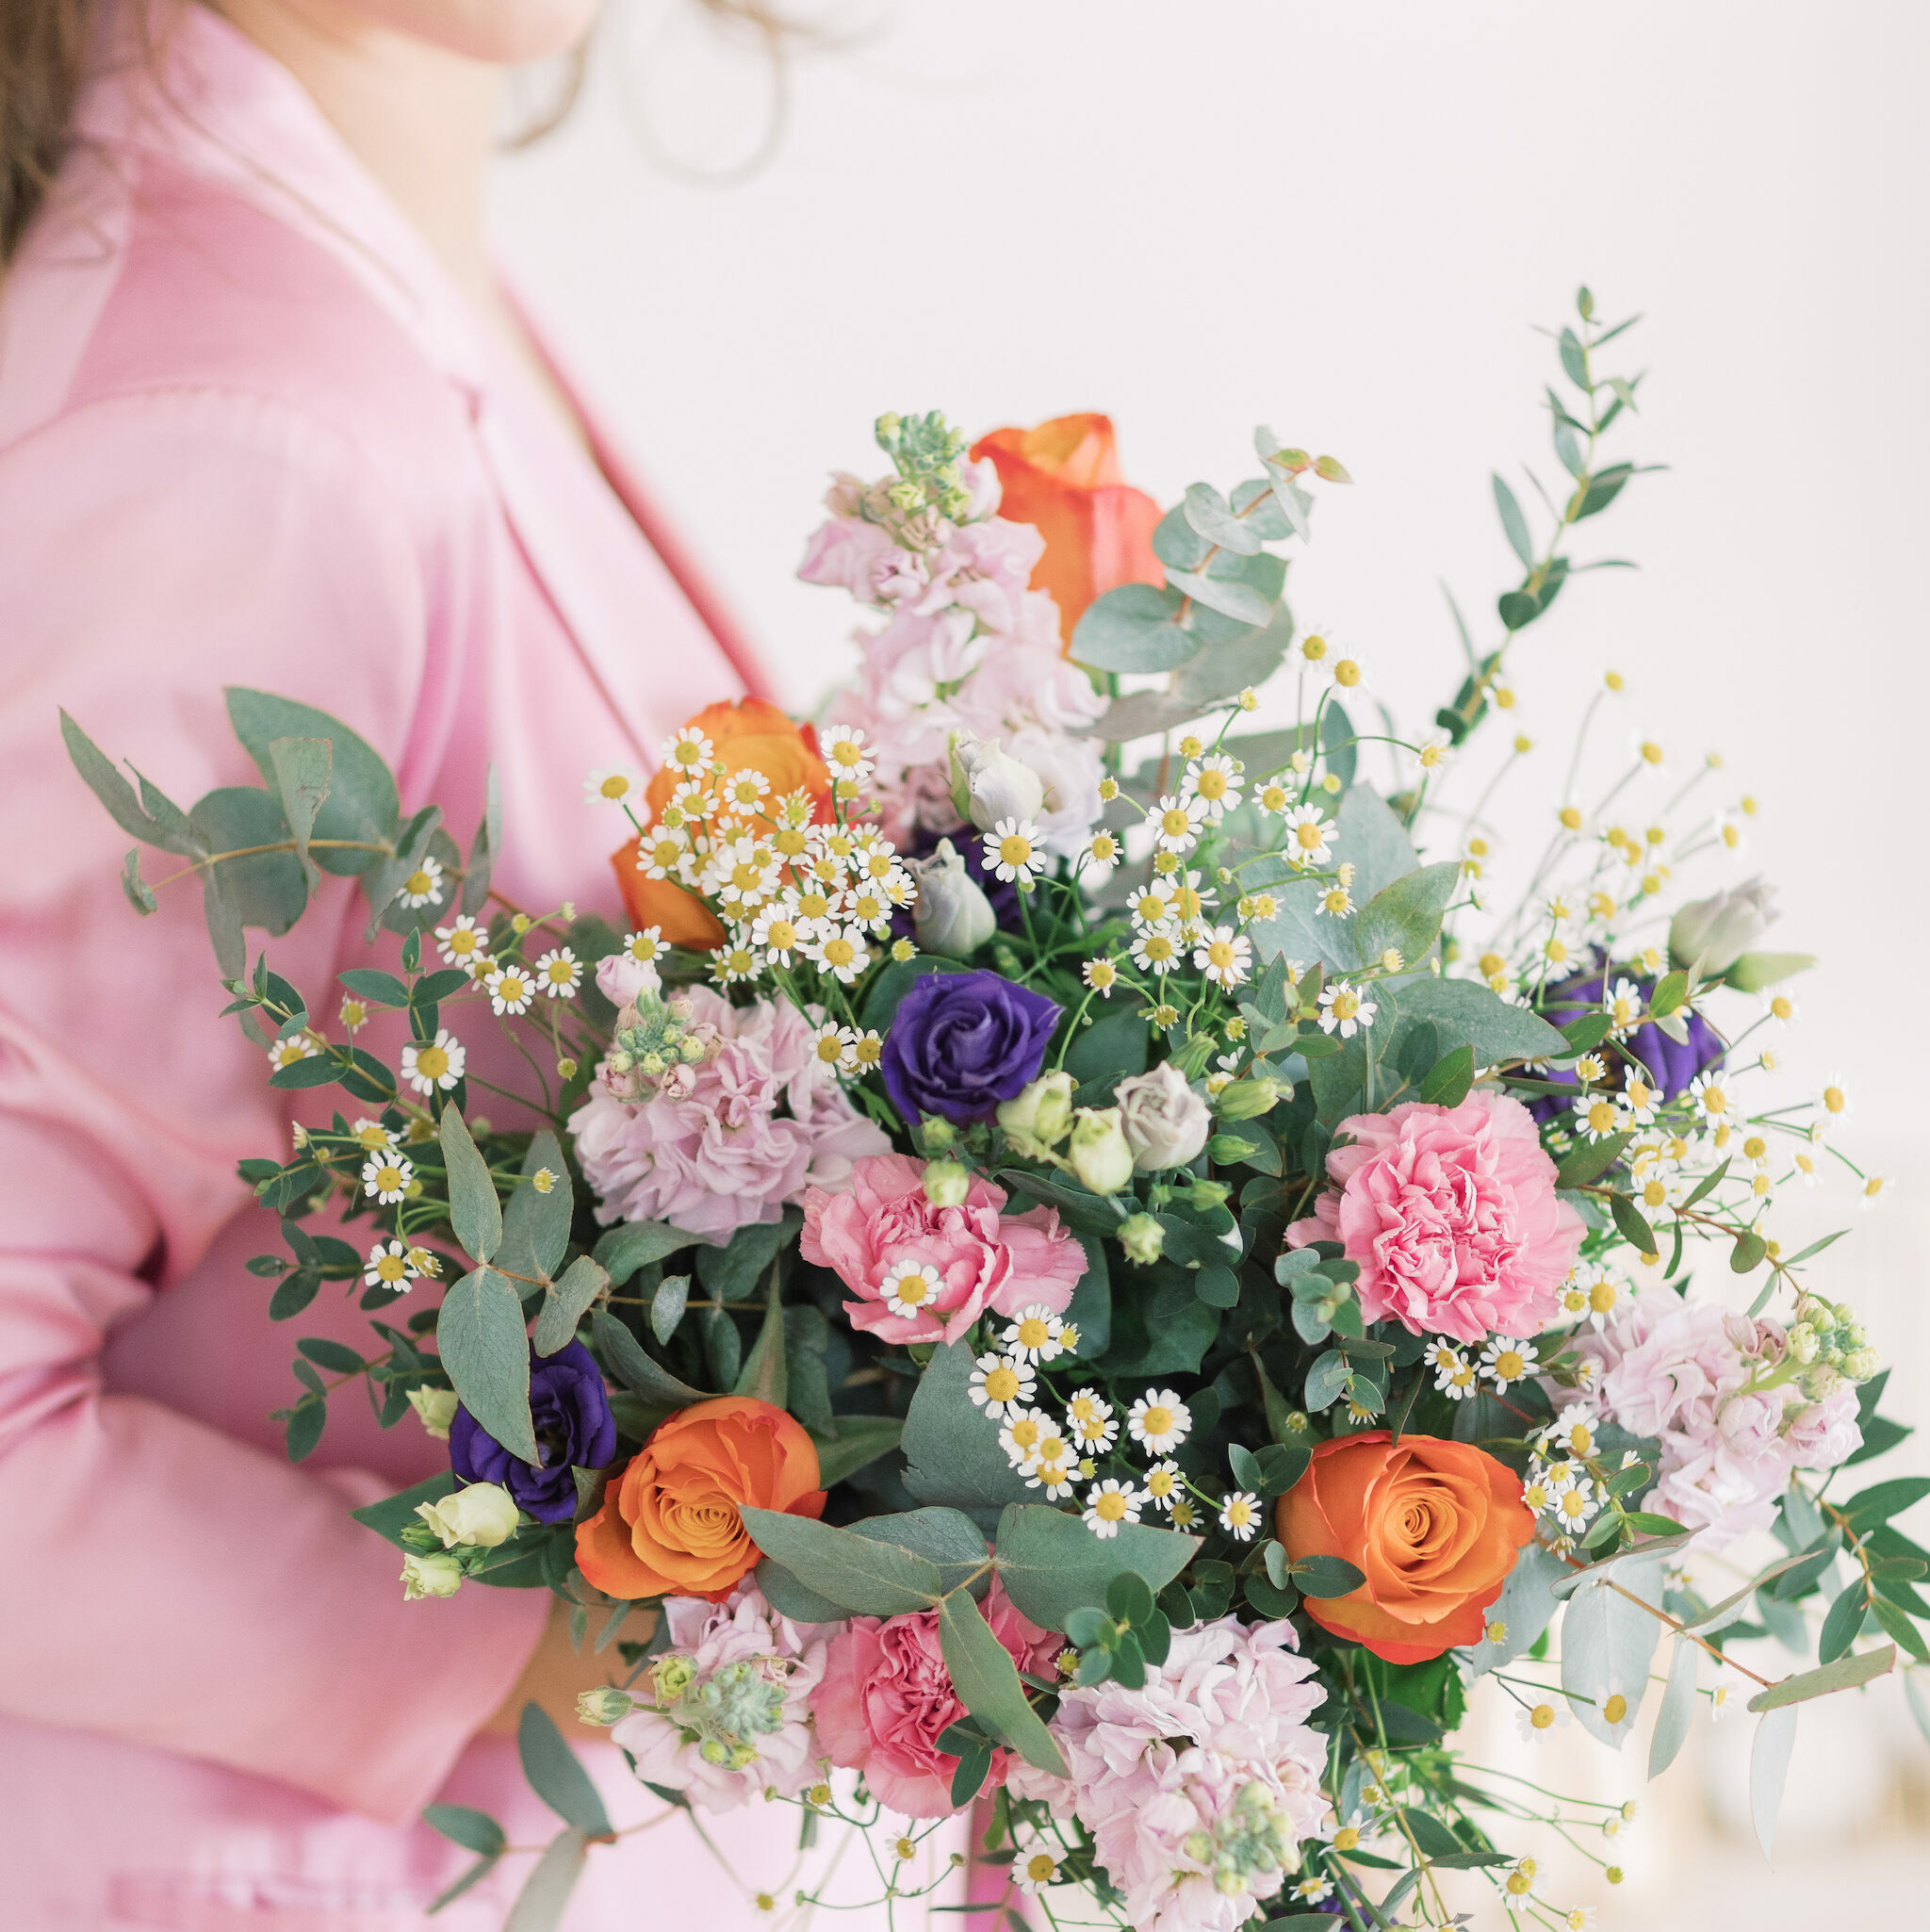 Send a bouquet to Alsemberg within 24 hours